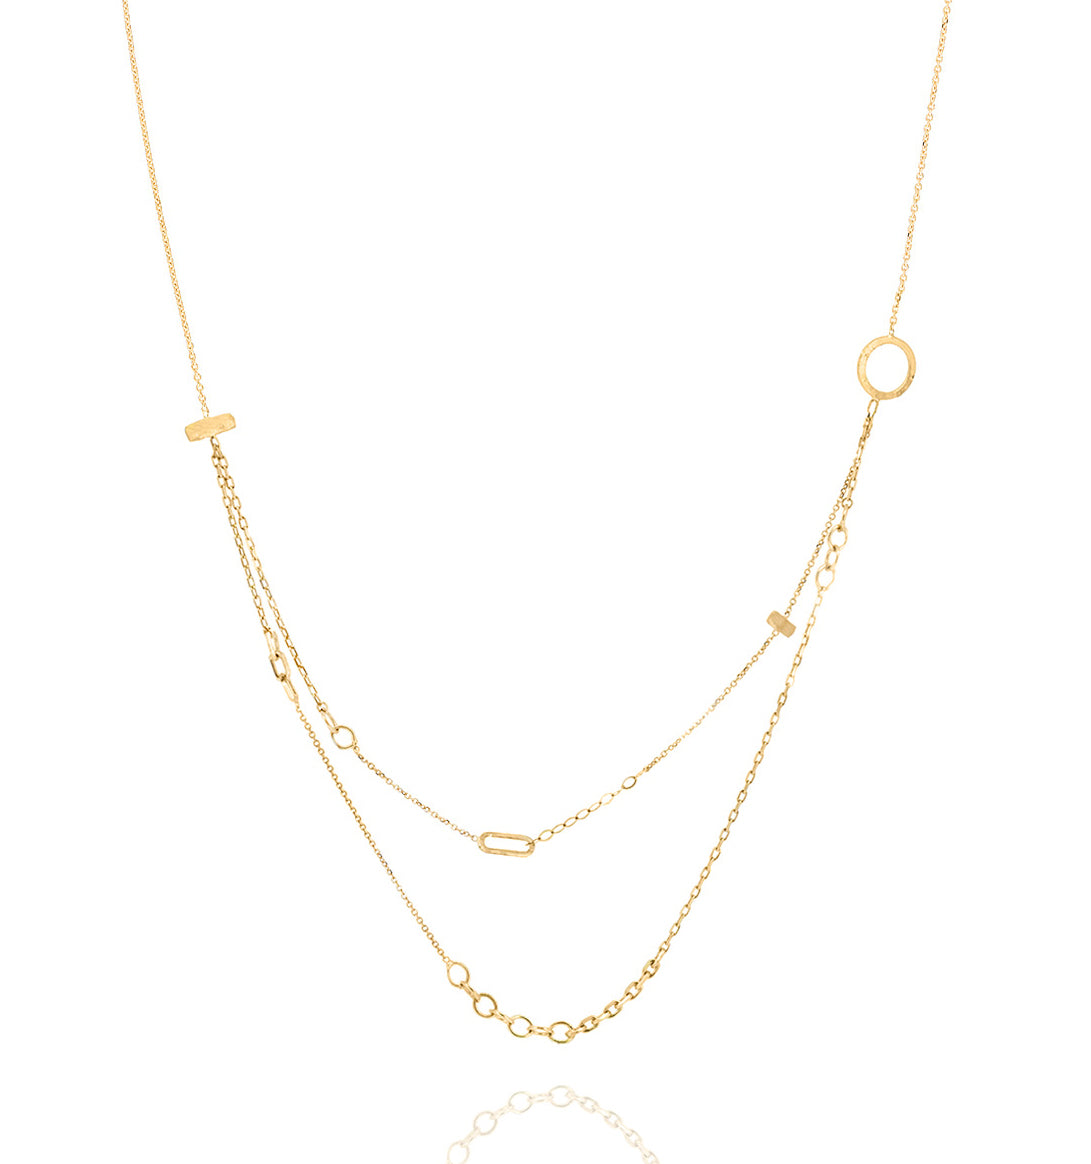 18ct Gold Chains Galore 2 chain necklace.